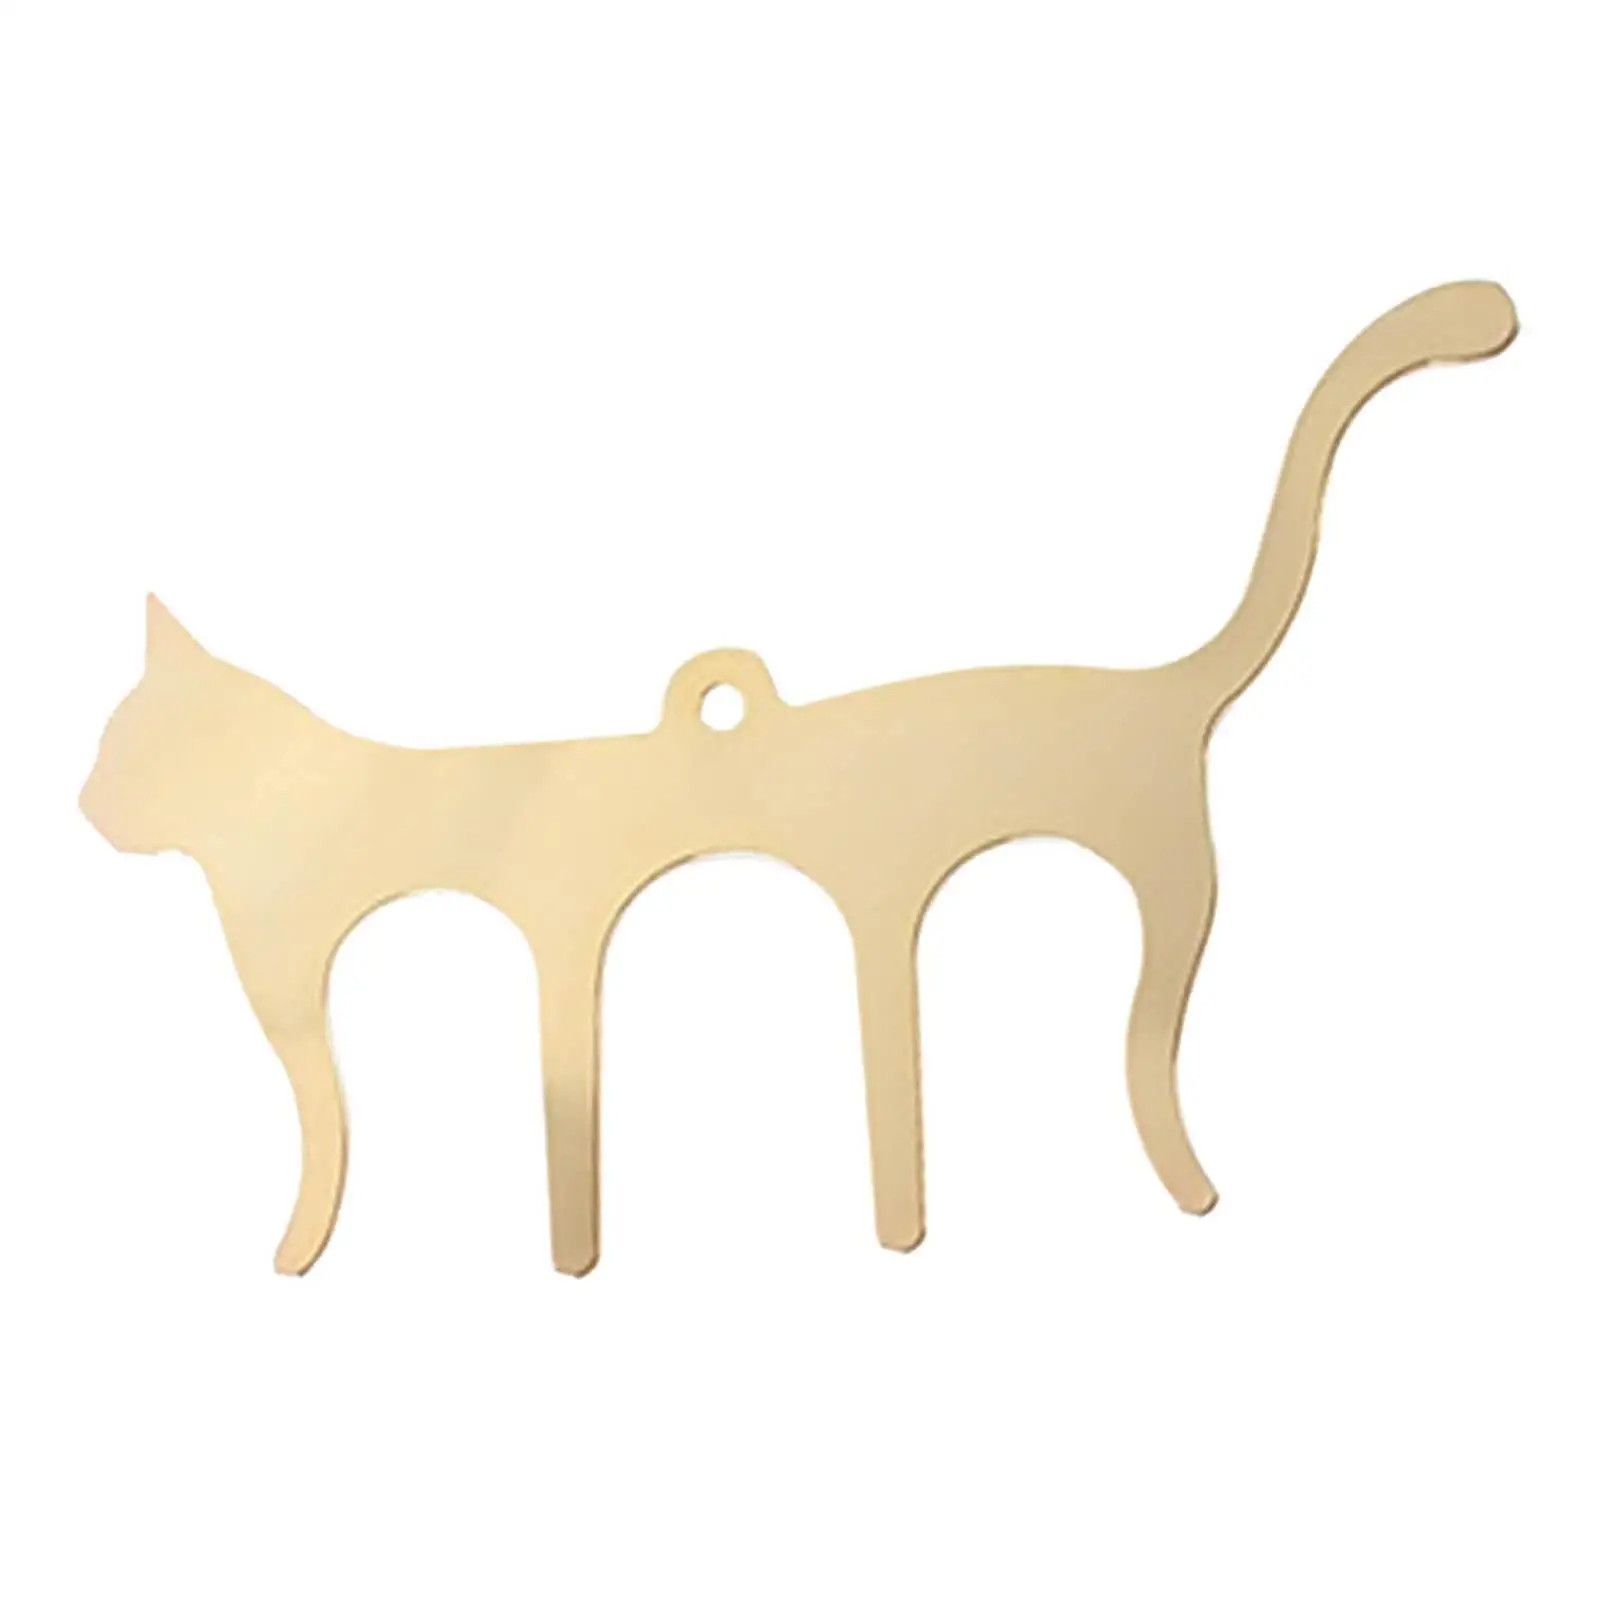 Cat Page Holder Bookmark School Supplies Book Holder for Reading Book Clip Book Page Holder for Book Cookbook Keyboard Students